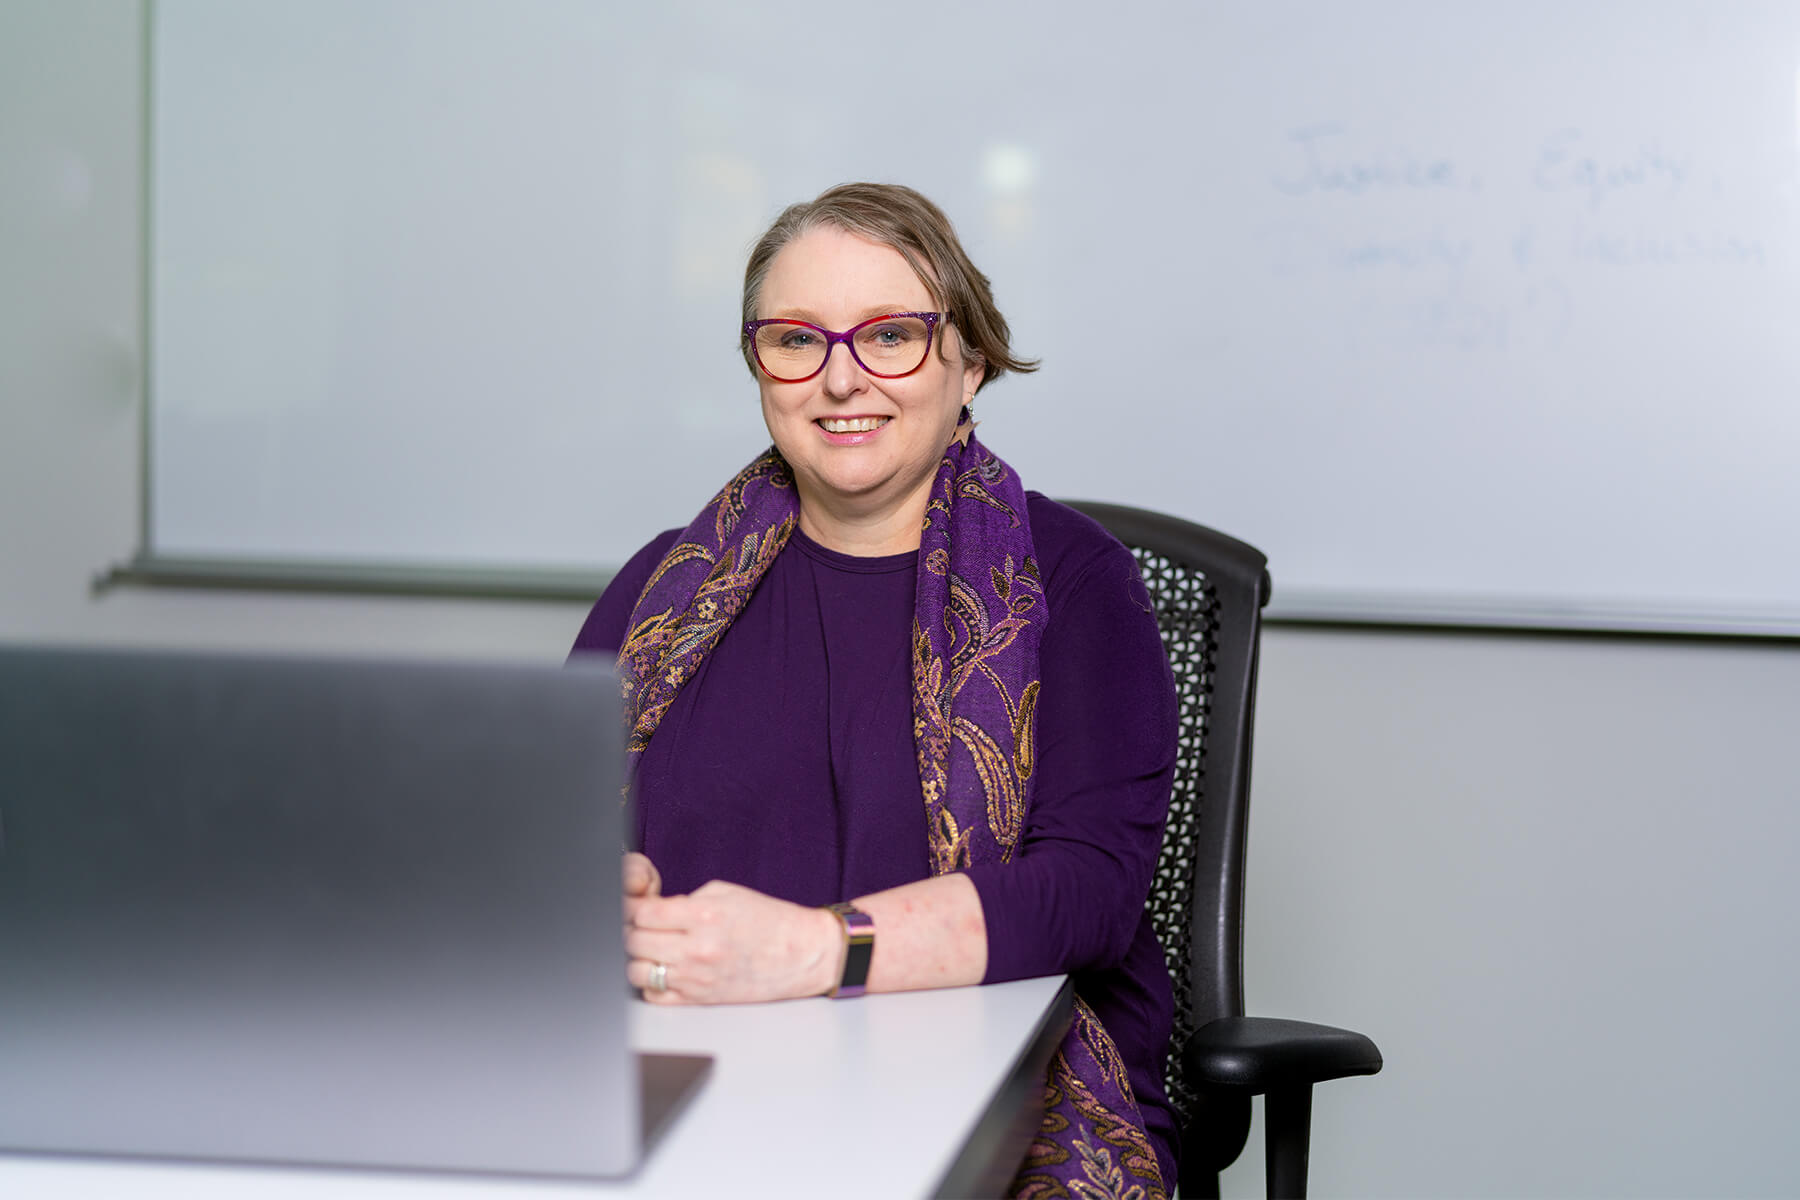 Senior lecturer Sonia Michaels sits in front of a classroom white board.